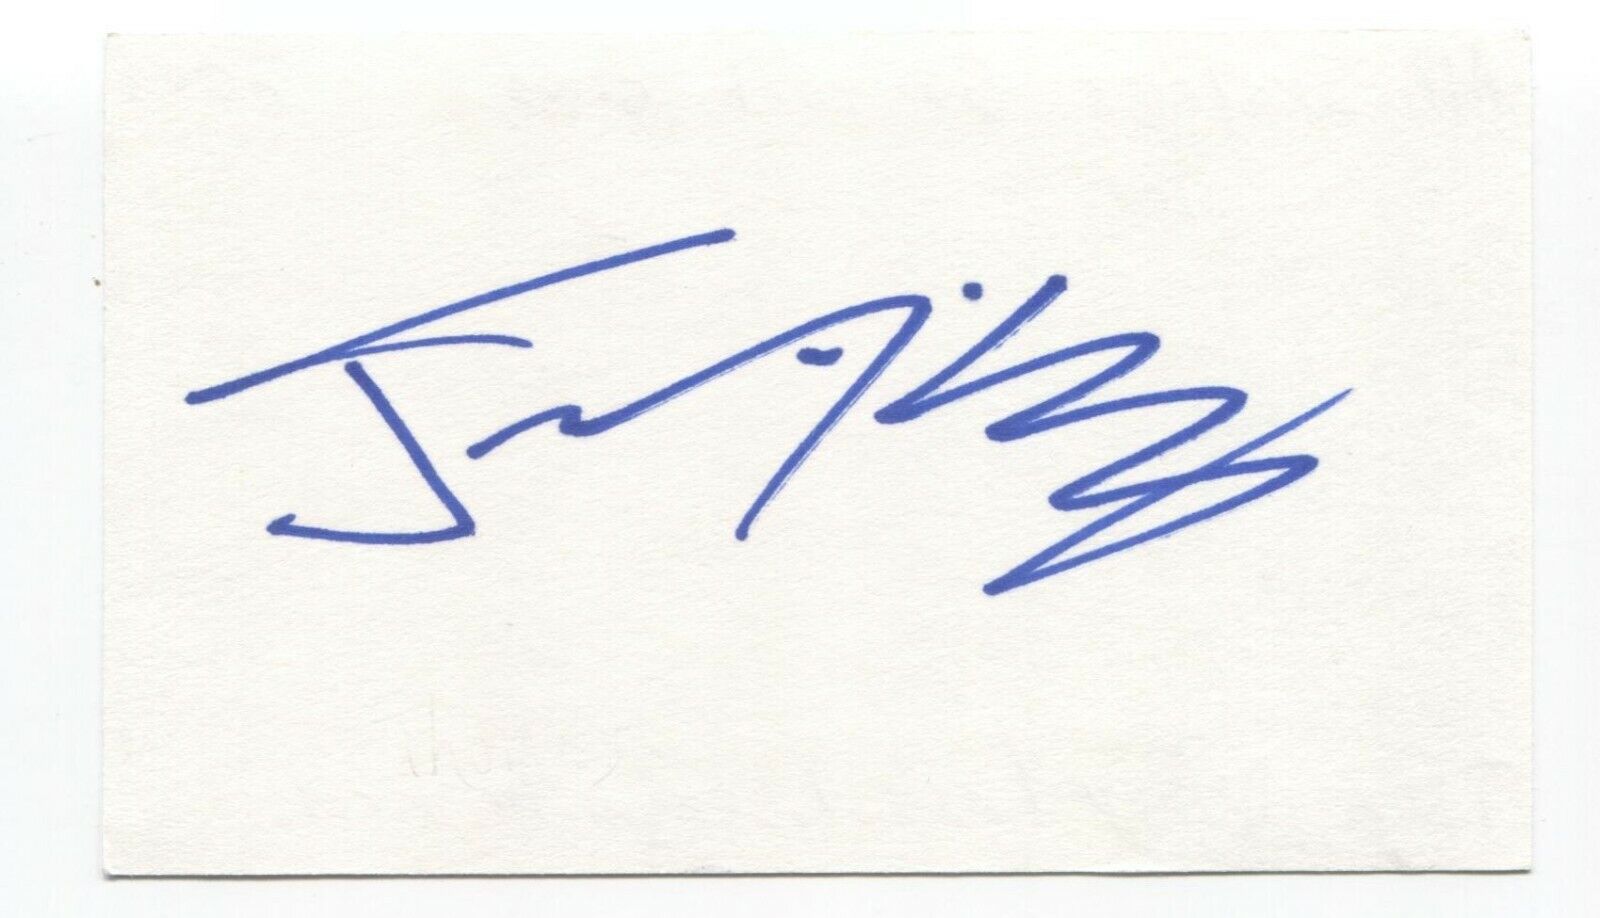 All Systems Go! - Thomas D'arcy Signed 3x5 Index Card Autographed Signature